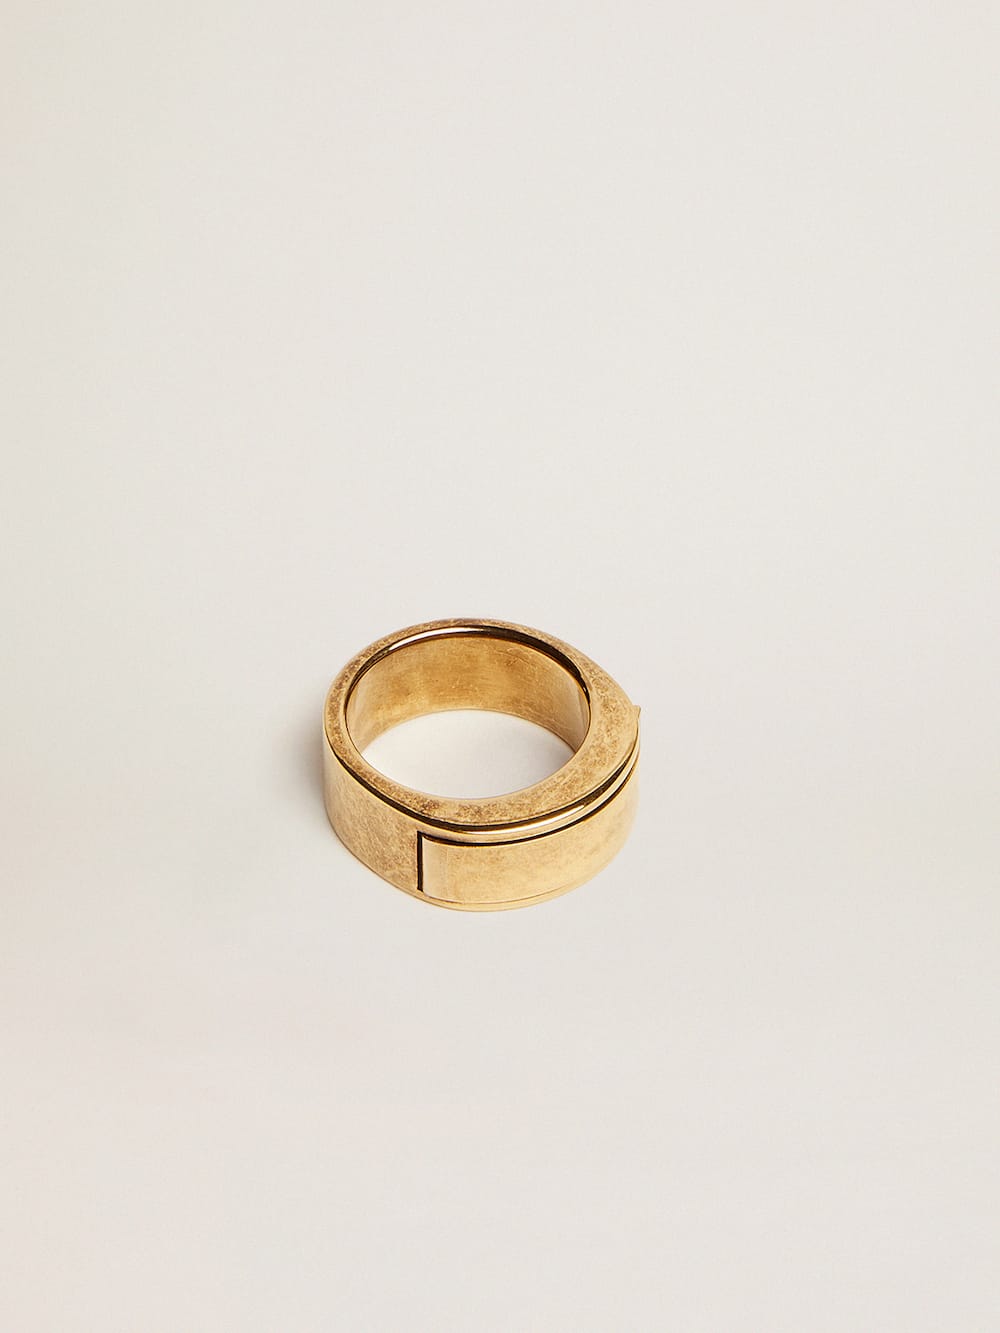 Golden Goose - Women's ring in antique gold color with hidden message in 